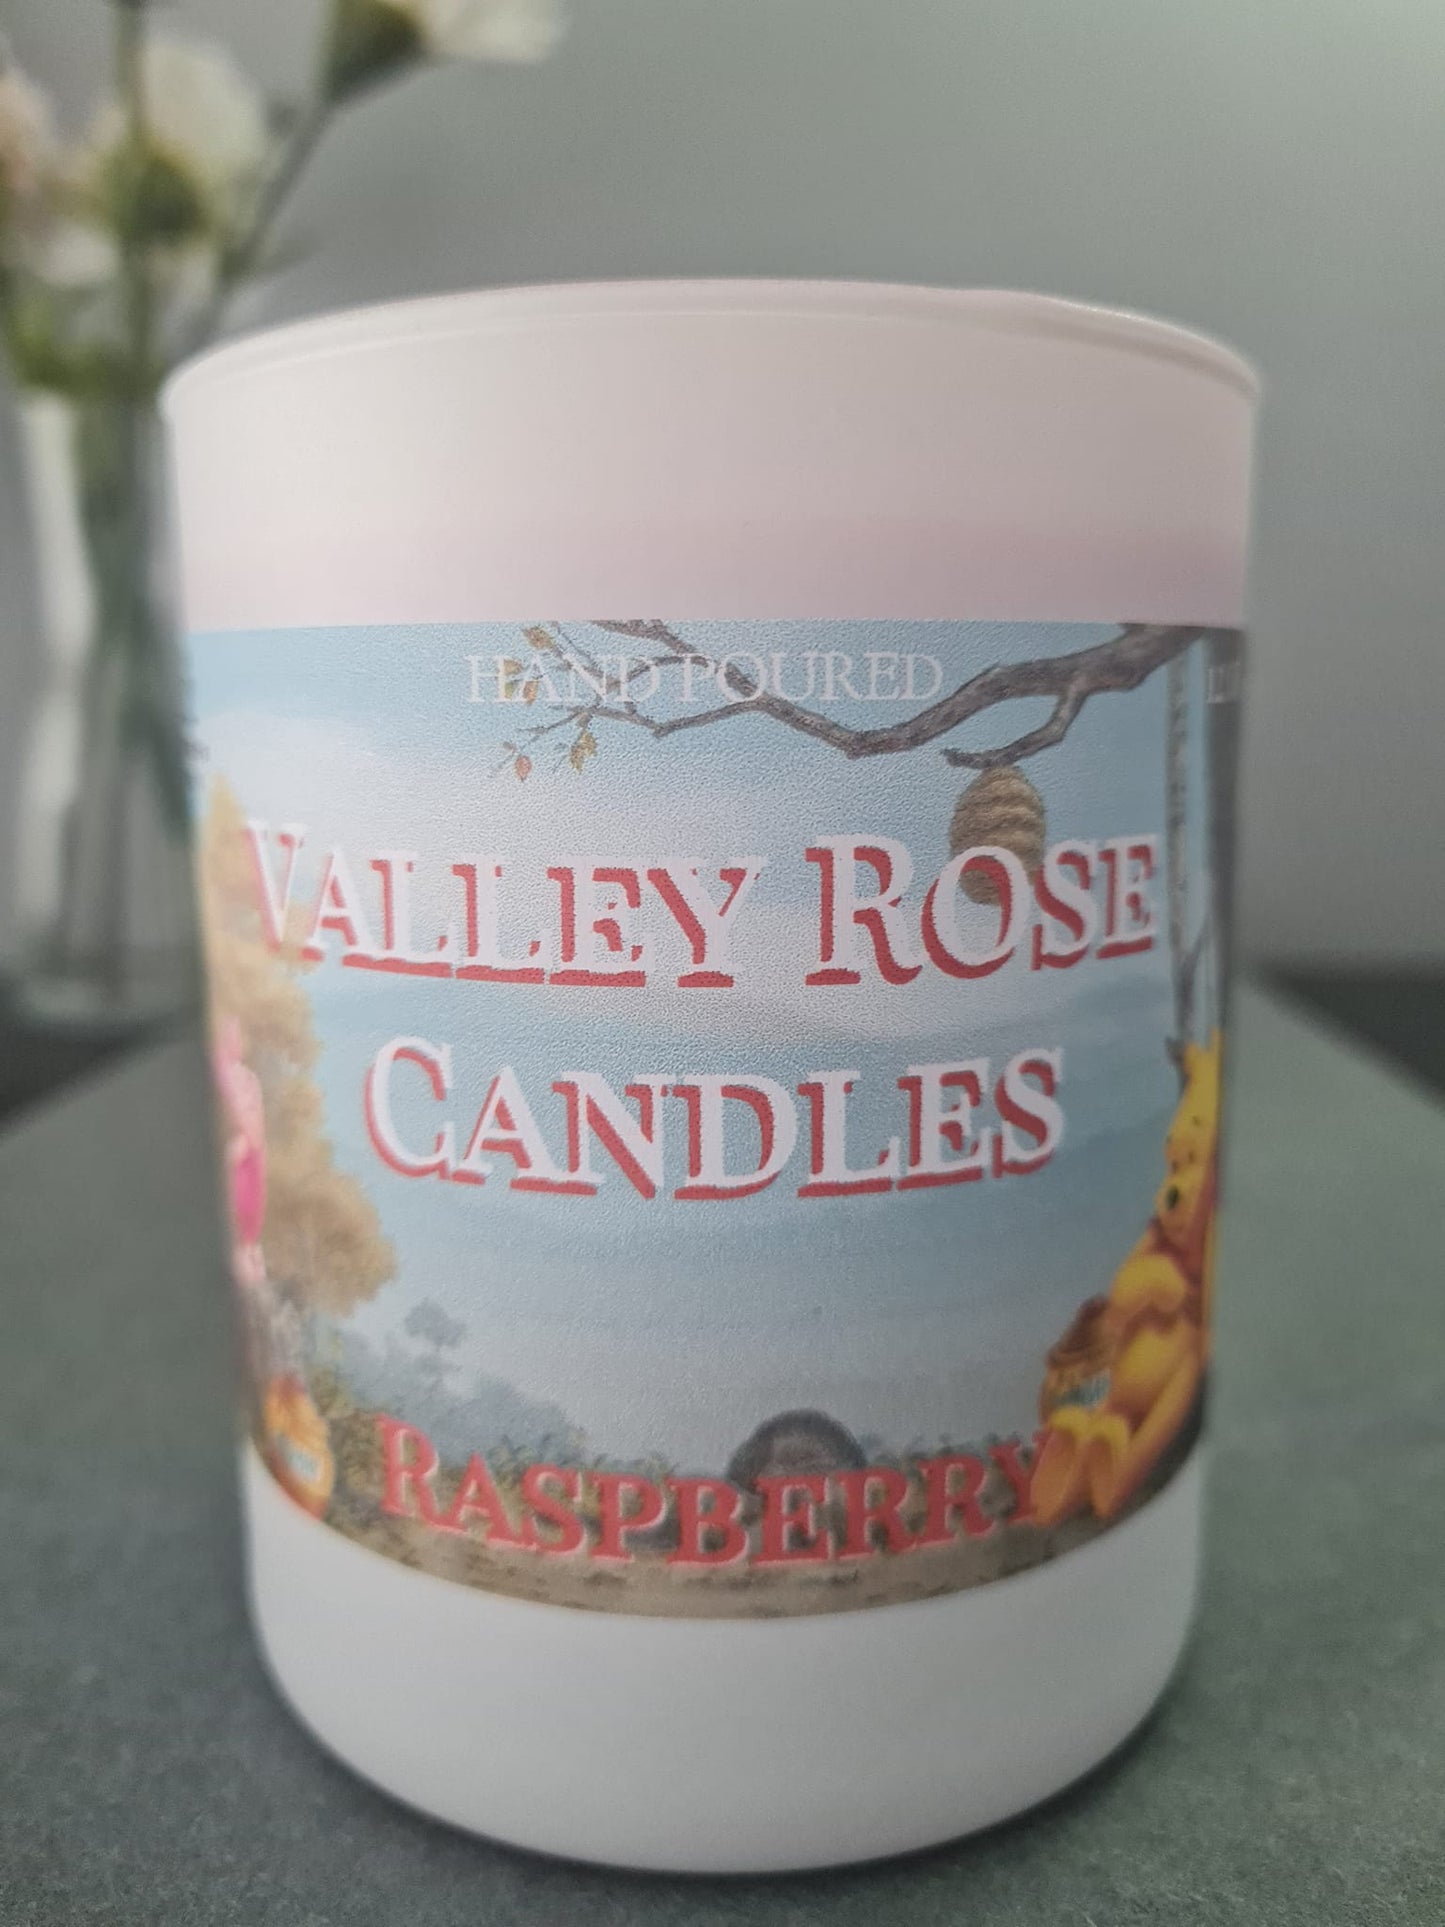 Our elegant hand poured soy wax candles are presented in a high quality matte white glass container.  And like our other candles, will arrive in one of our gift boxes.  You choose which fragrance you would like from any of our ranges and what message you would like.  Just contact us at info@valleyrosecandles.co.uk with your details  These are ideal for weddings, birthdays, Christmas pretty much any occasion.